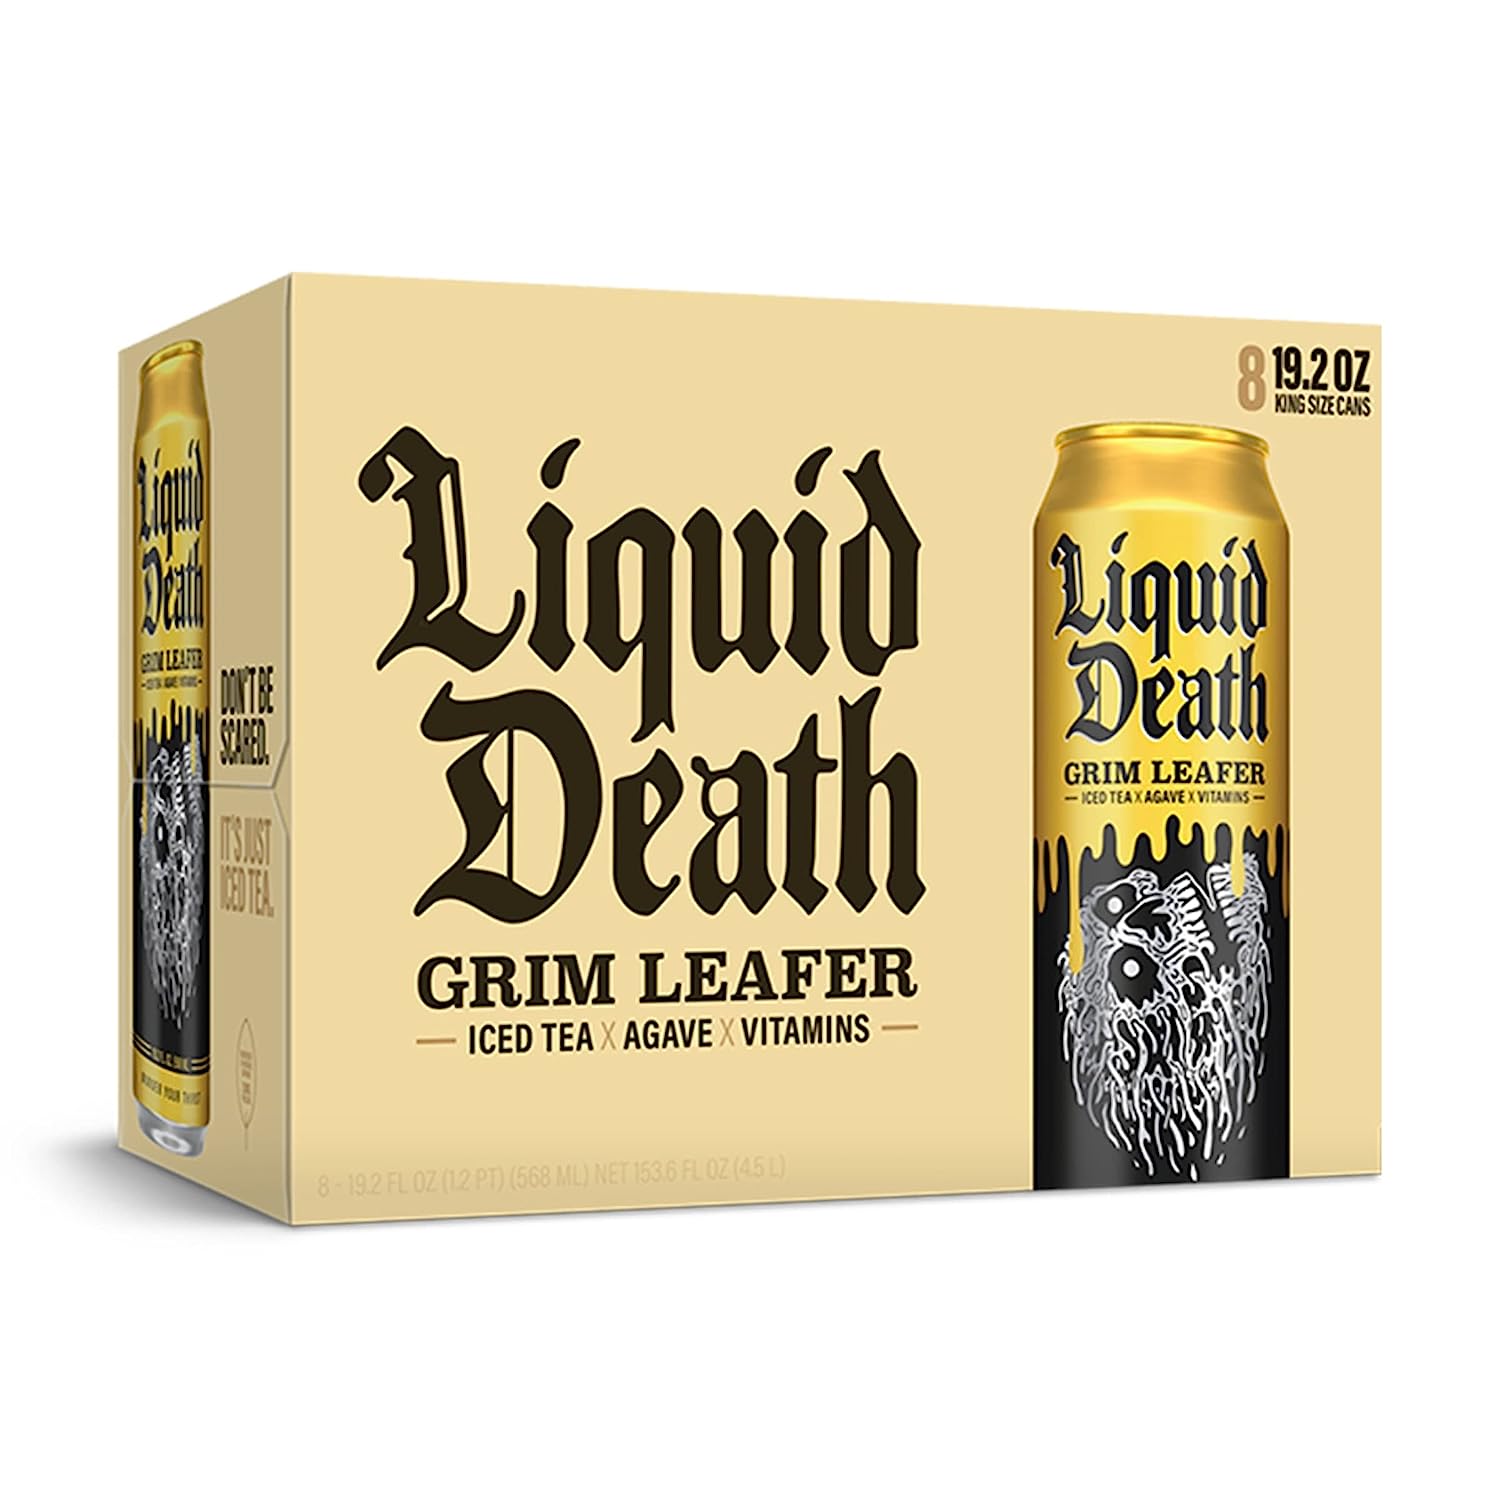 Wholesale prices with free shipping all over United States Liquid Death Iced Black Tea, Rest in Peach 19.2 oz King Size Cans (8-Pack) - Steven Deals